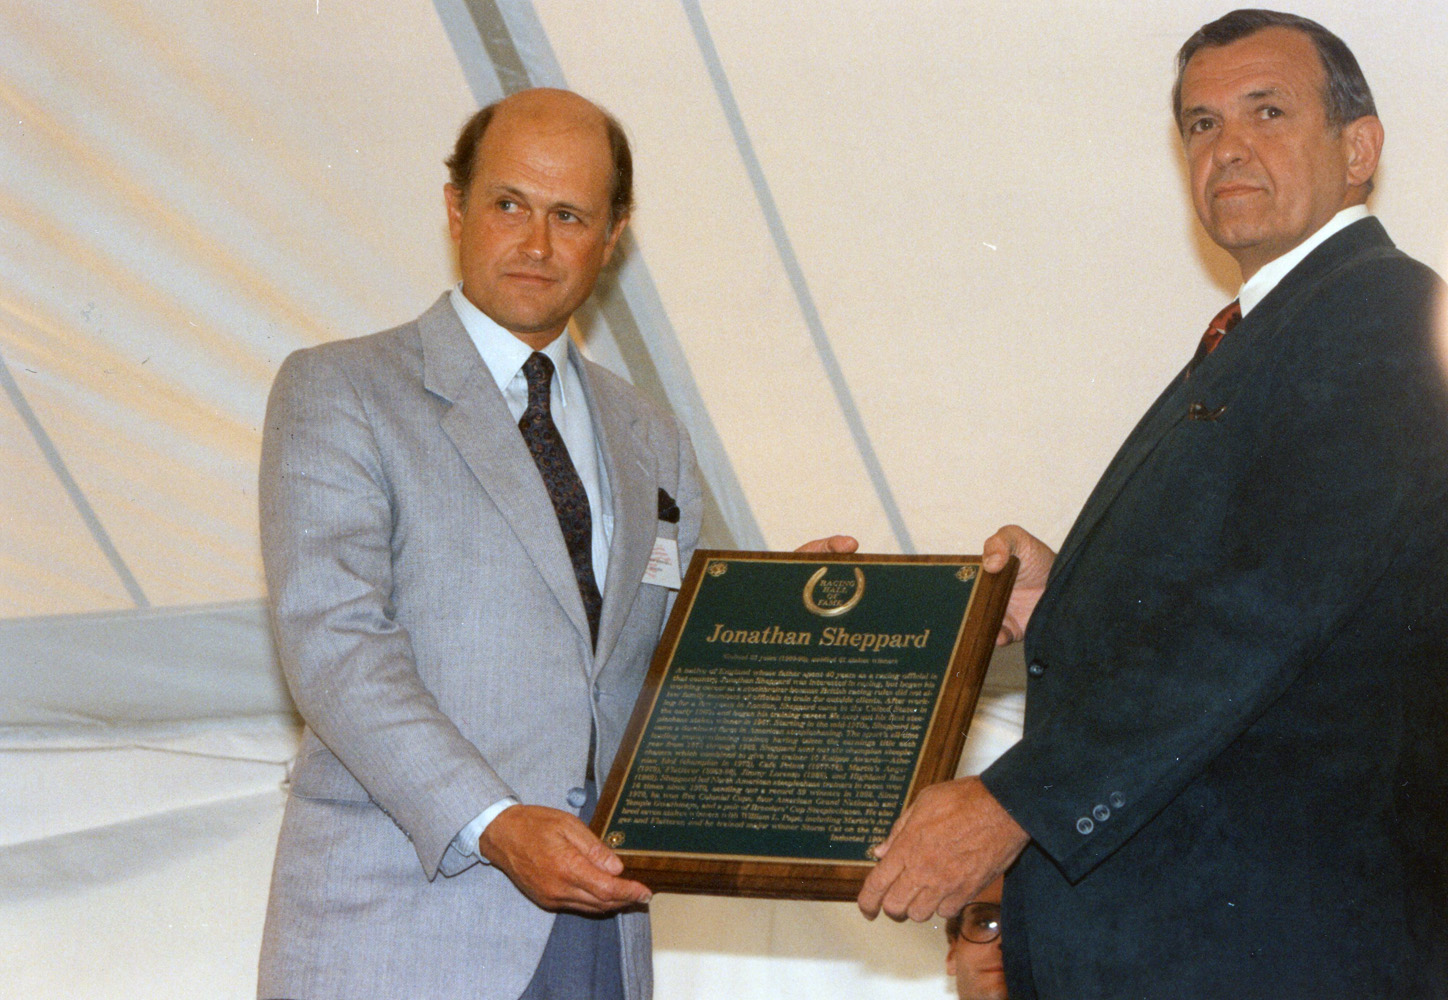 Jonathan Sheppard receiving his Hall of Fame plaque at the 1990 Hall of fame induction ceremony (Barbara D. Livingston/Museum Collection)